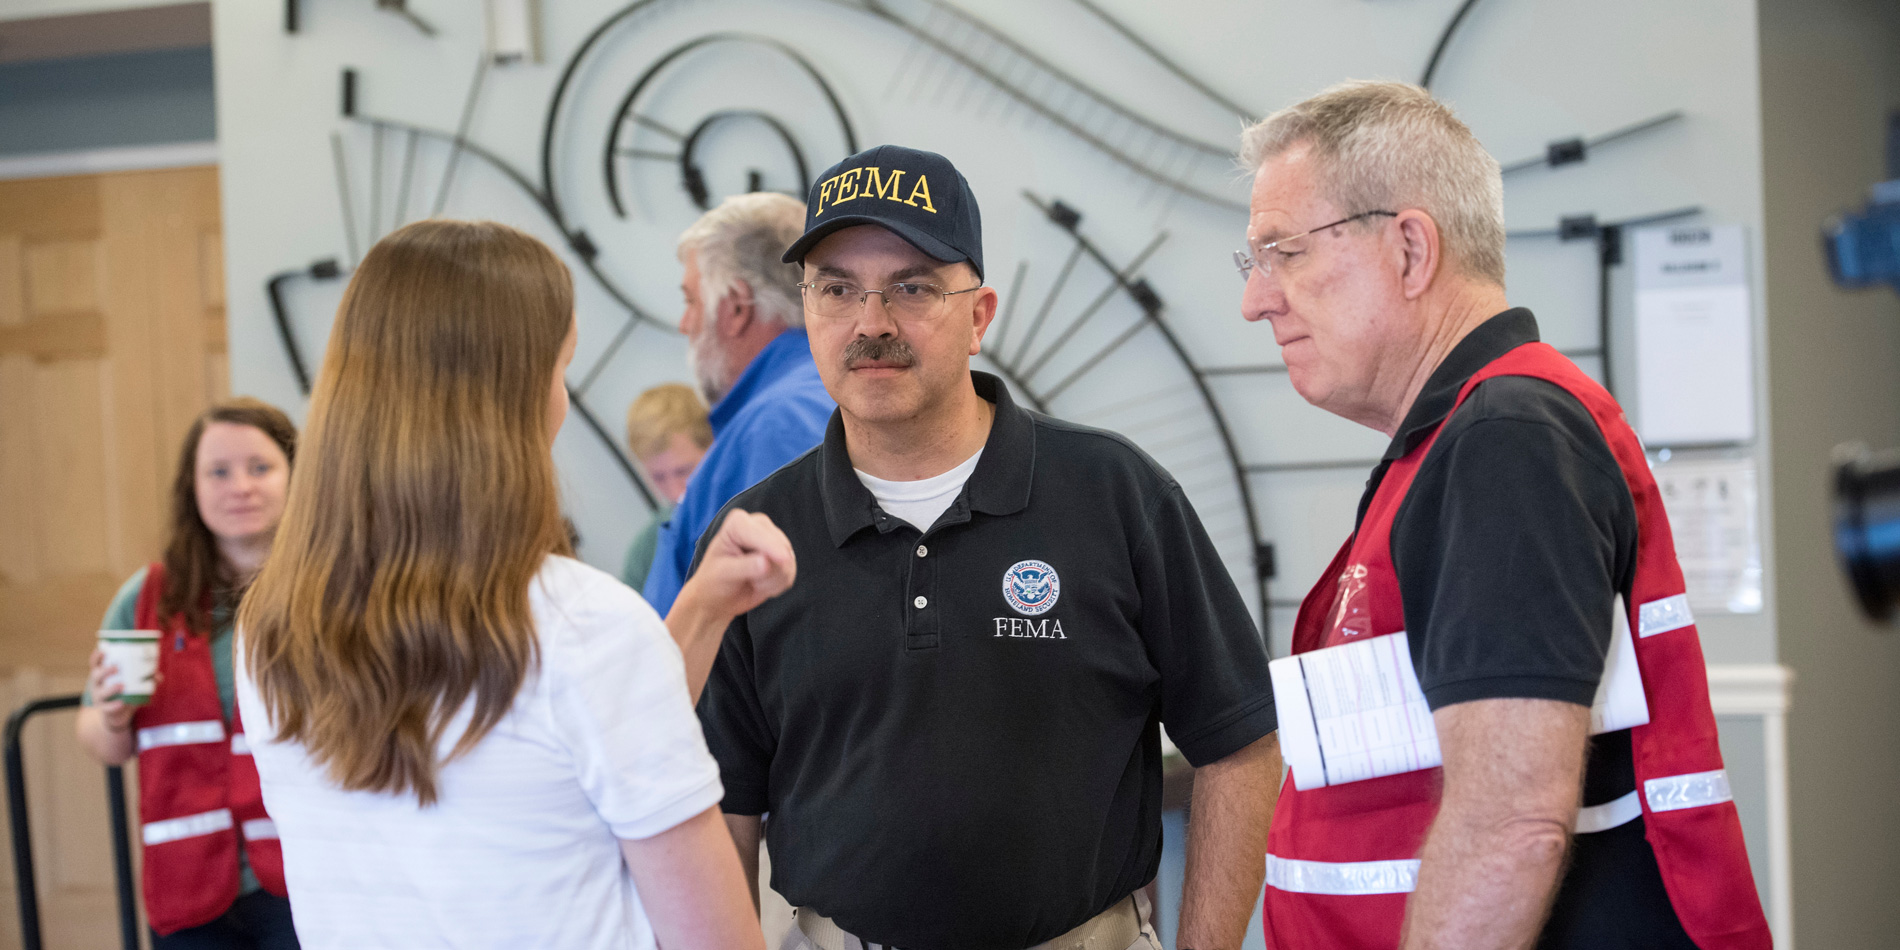 Hurricane drill will members from FEMA on campus